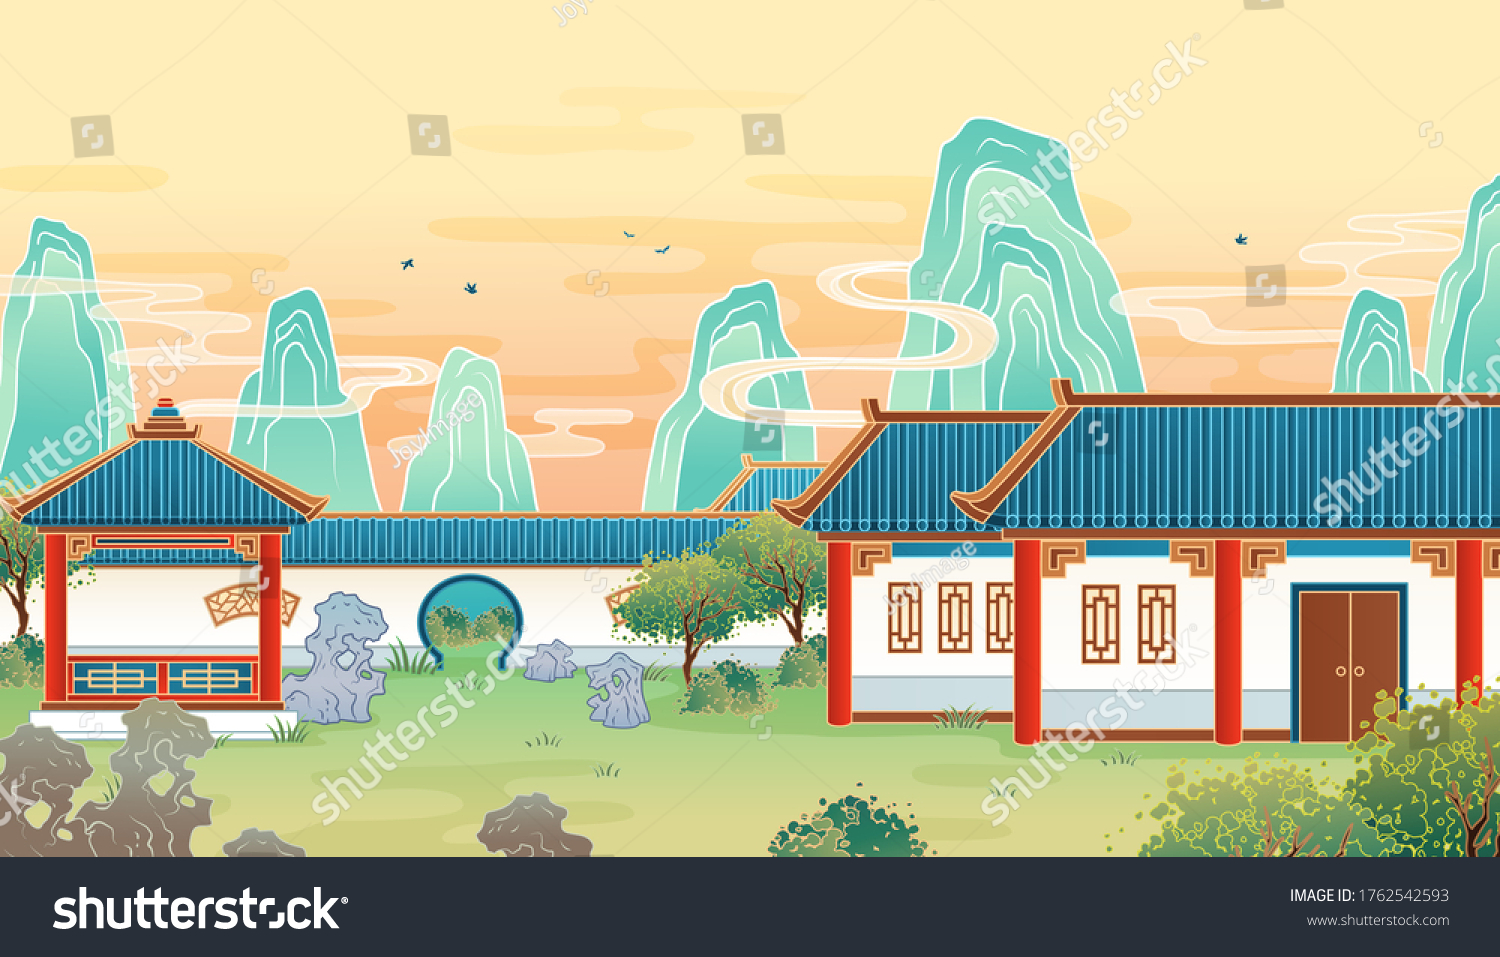 Scenic illustration of ancient Chinese garden and houses, in flat design #1762542593